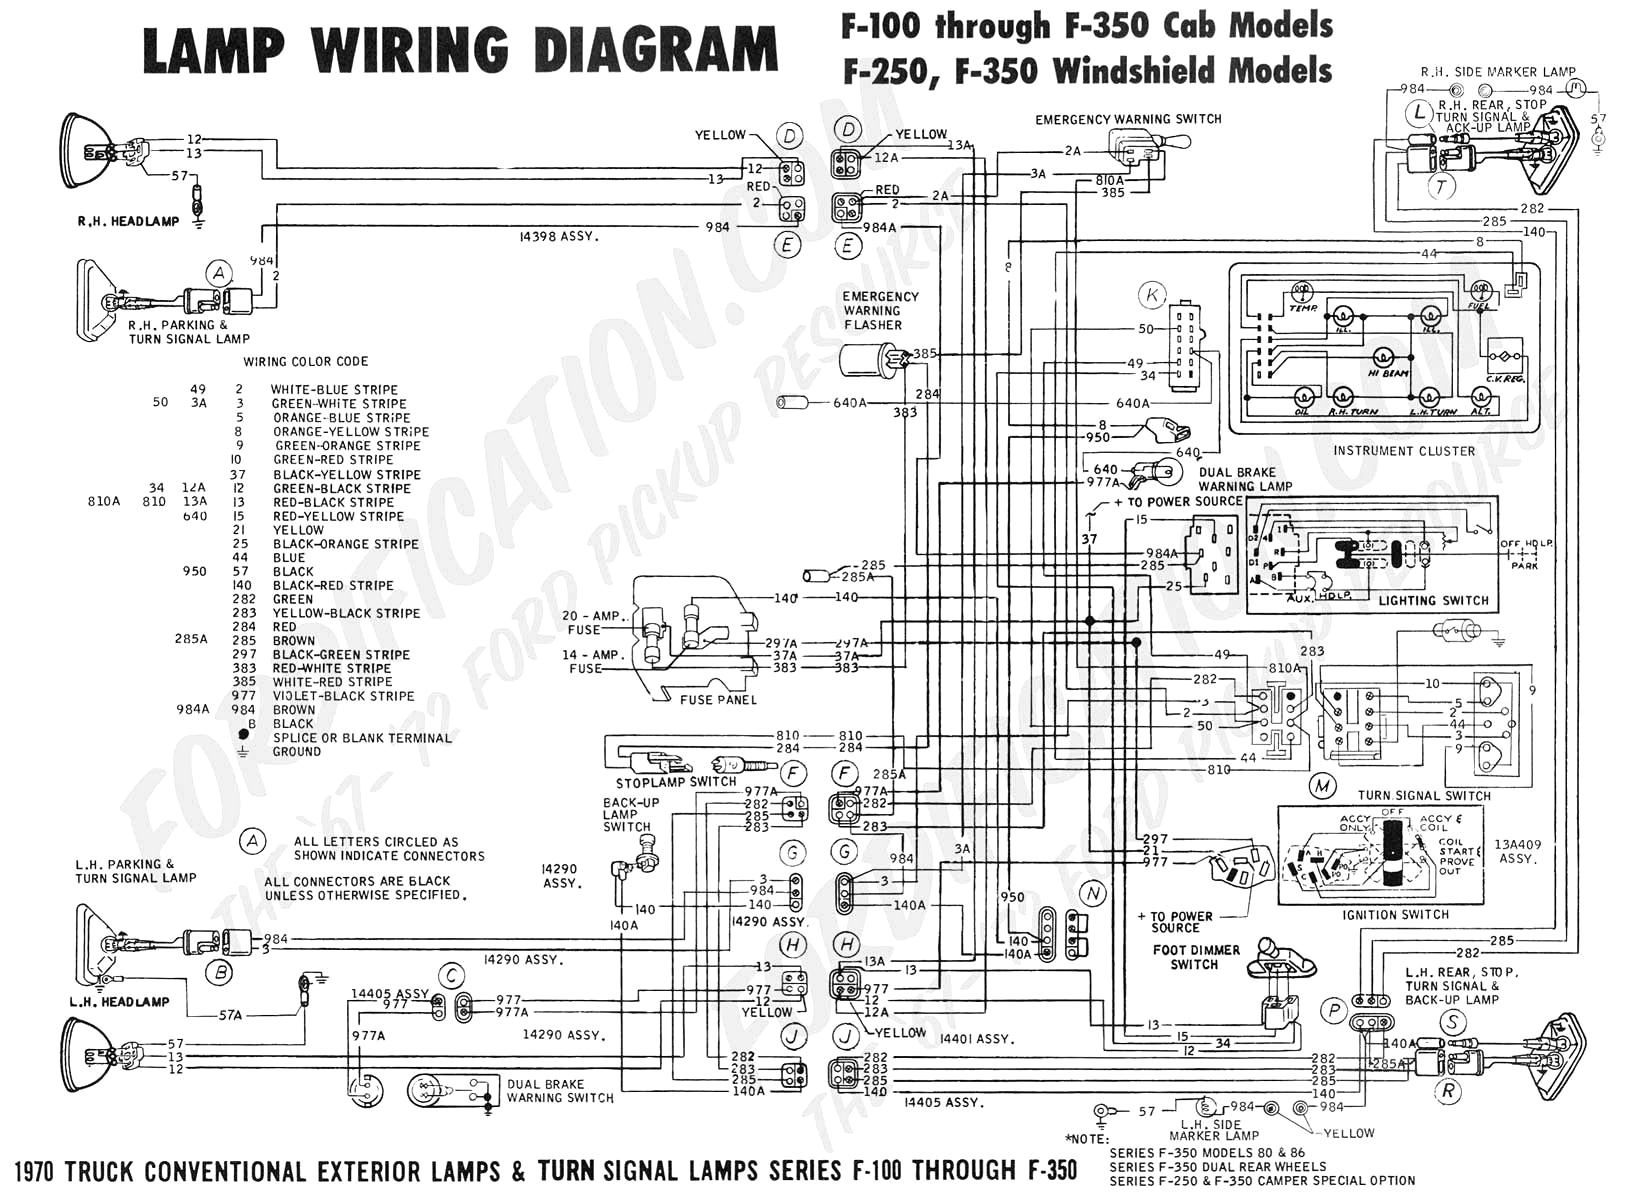 Ford F 150 Trailer Hitch Wiring Diagram 5 4 ford Wiring Tractor Lights Wiring Diagram then